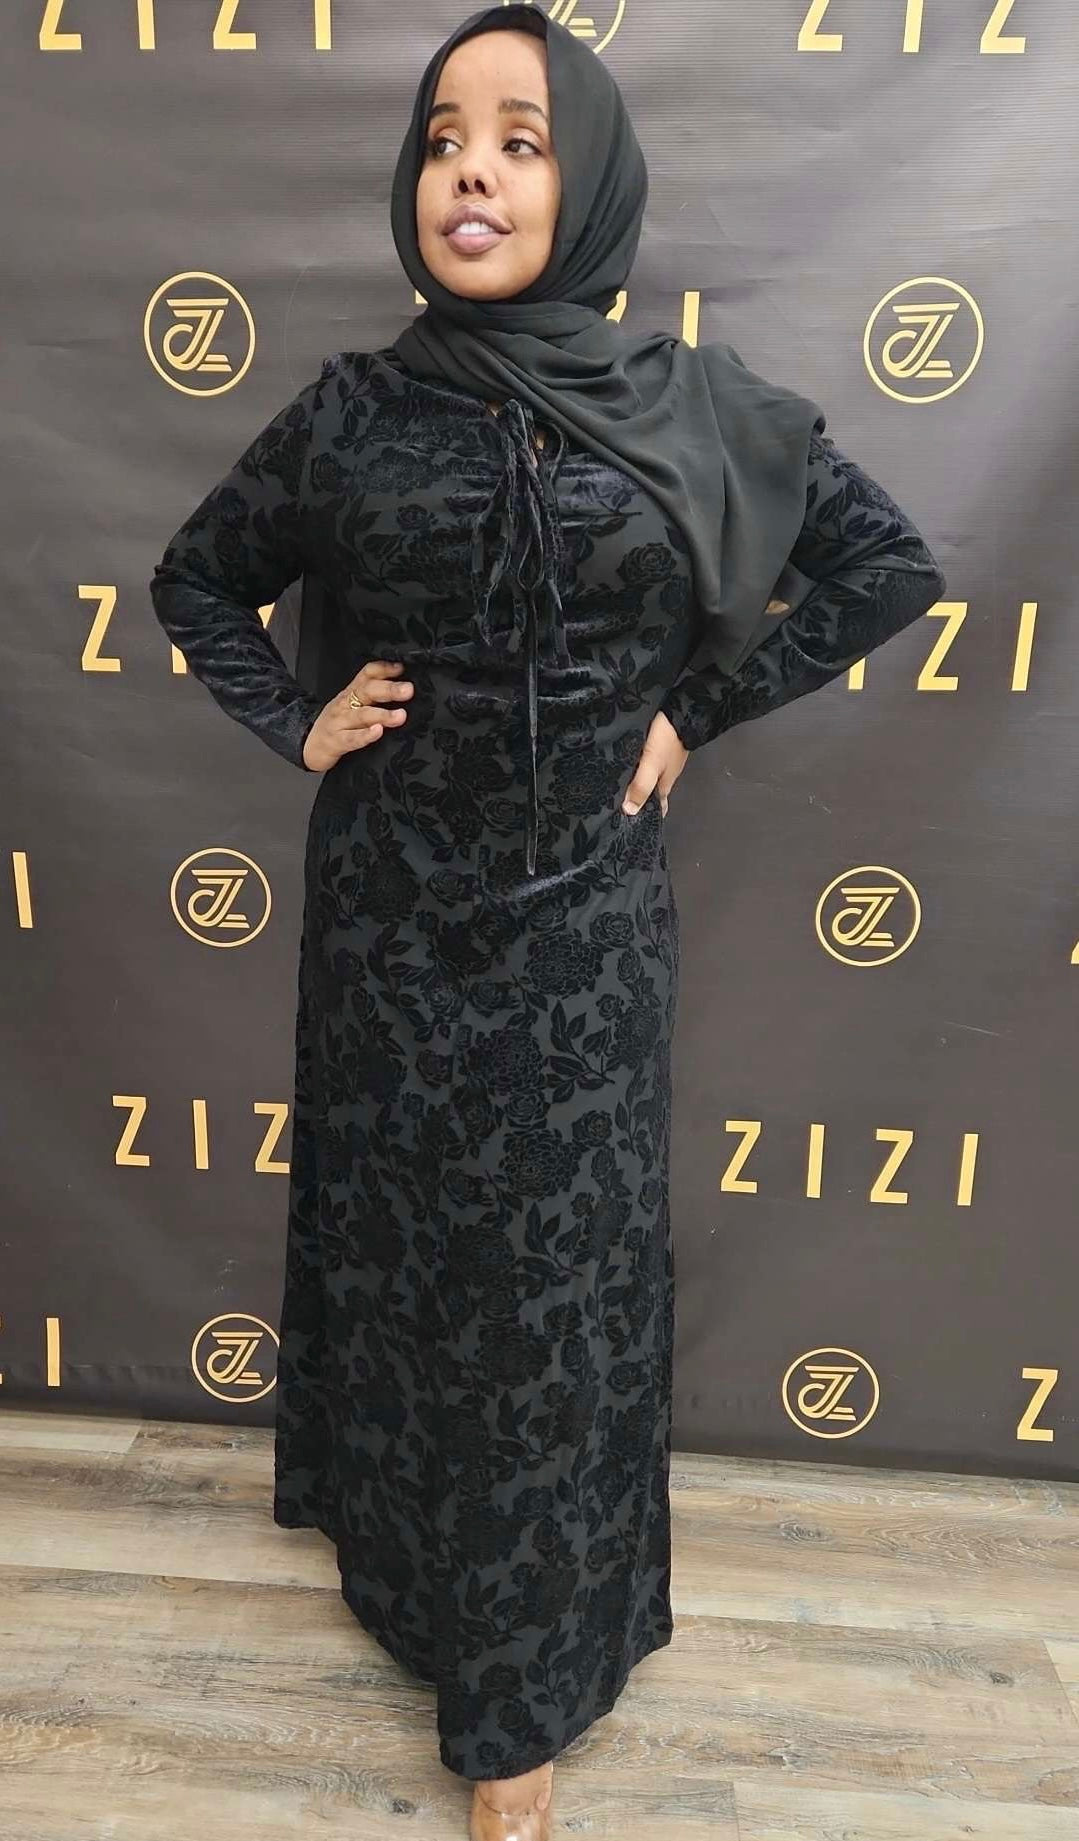 Velvet Evening Dress in a solid black color available at ZIZI Boutique 